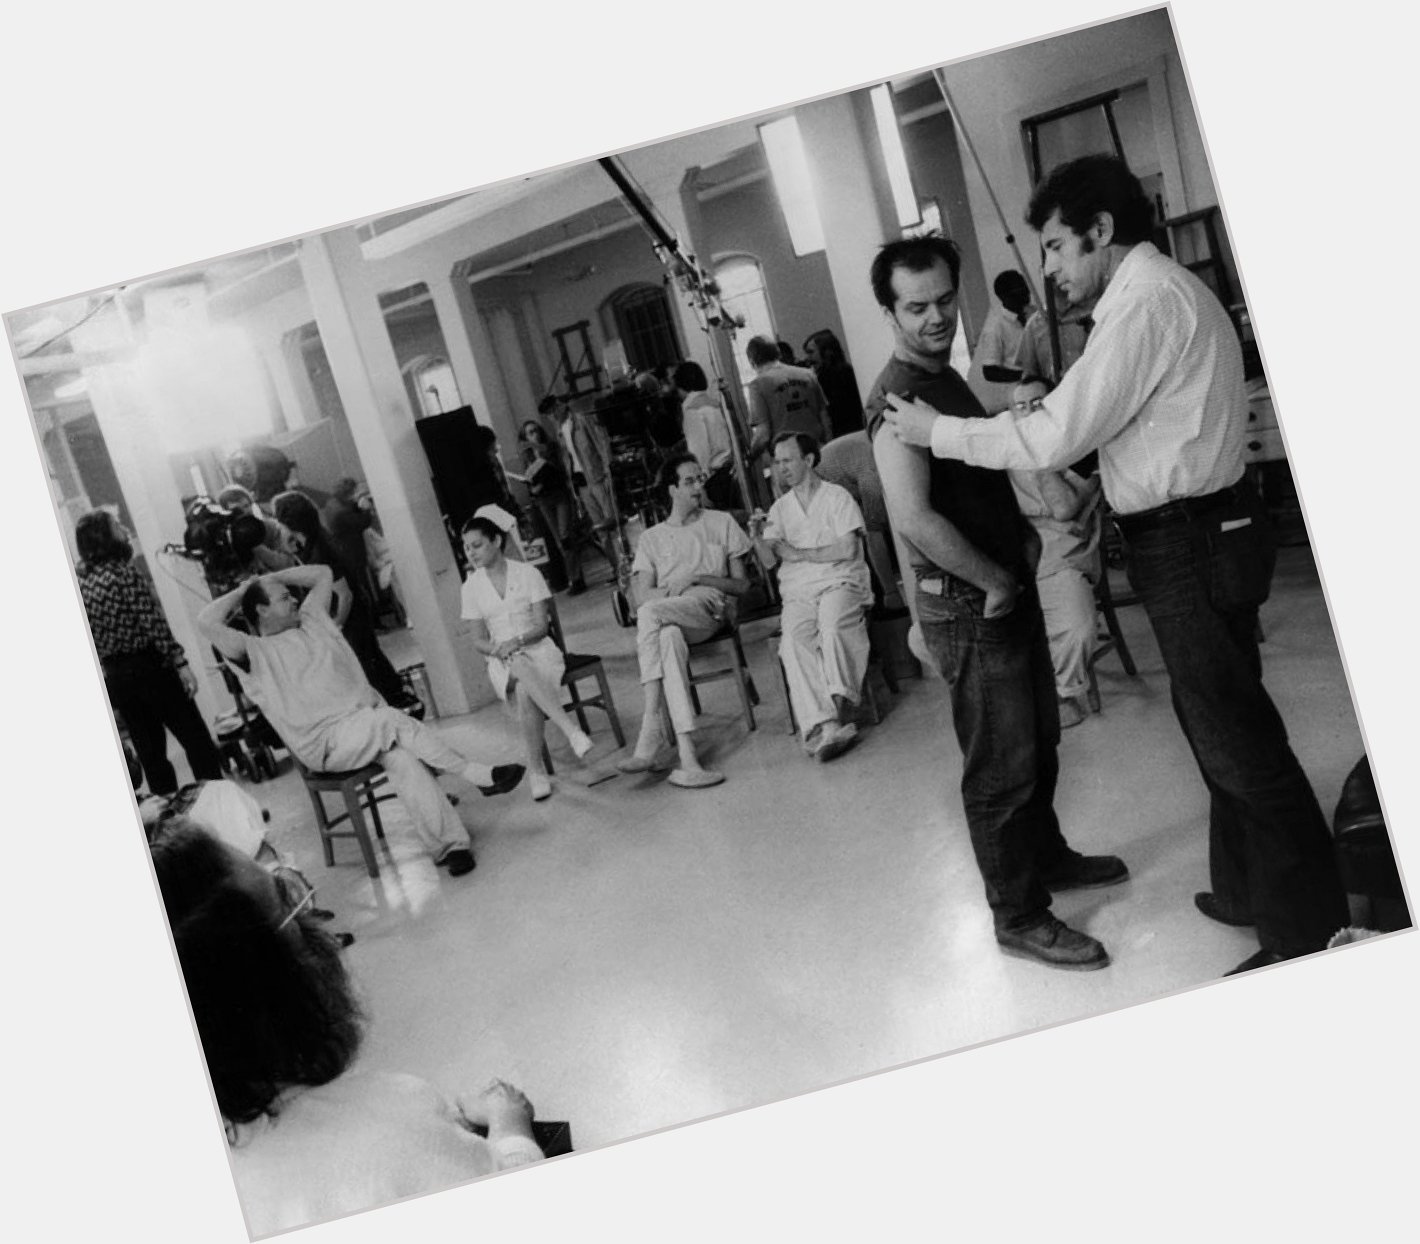 Happy birthday Milo Forman
Coaching Jack Nicholson on the set of One Flew Over The Cuckoo\s Nest, 1975 